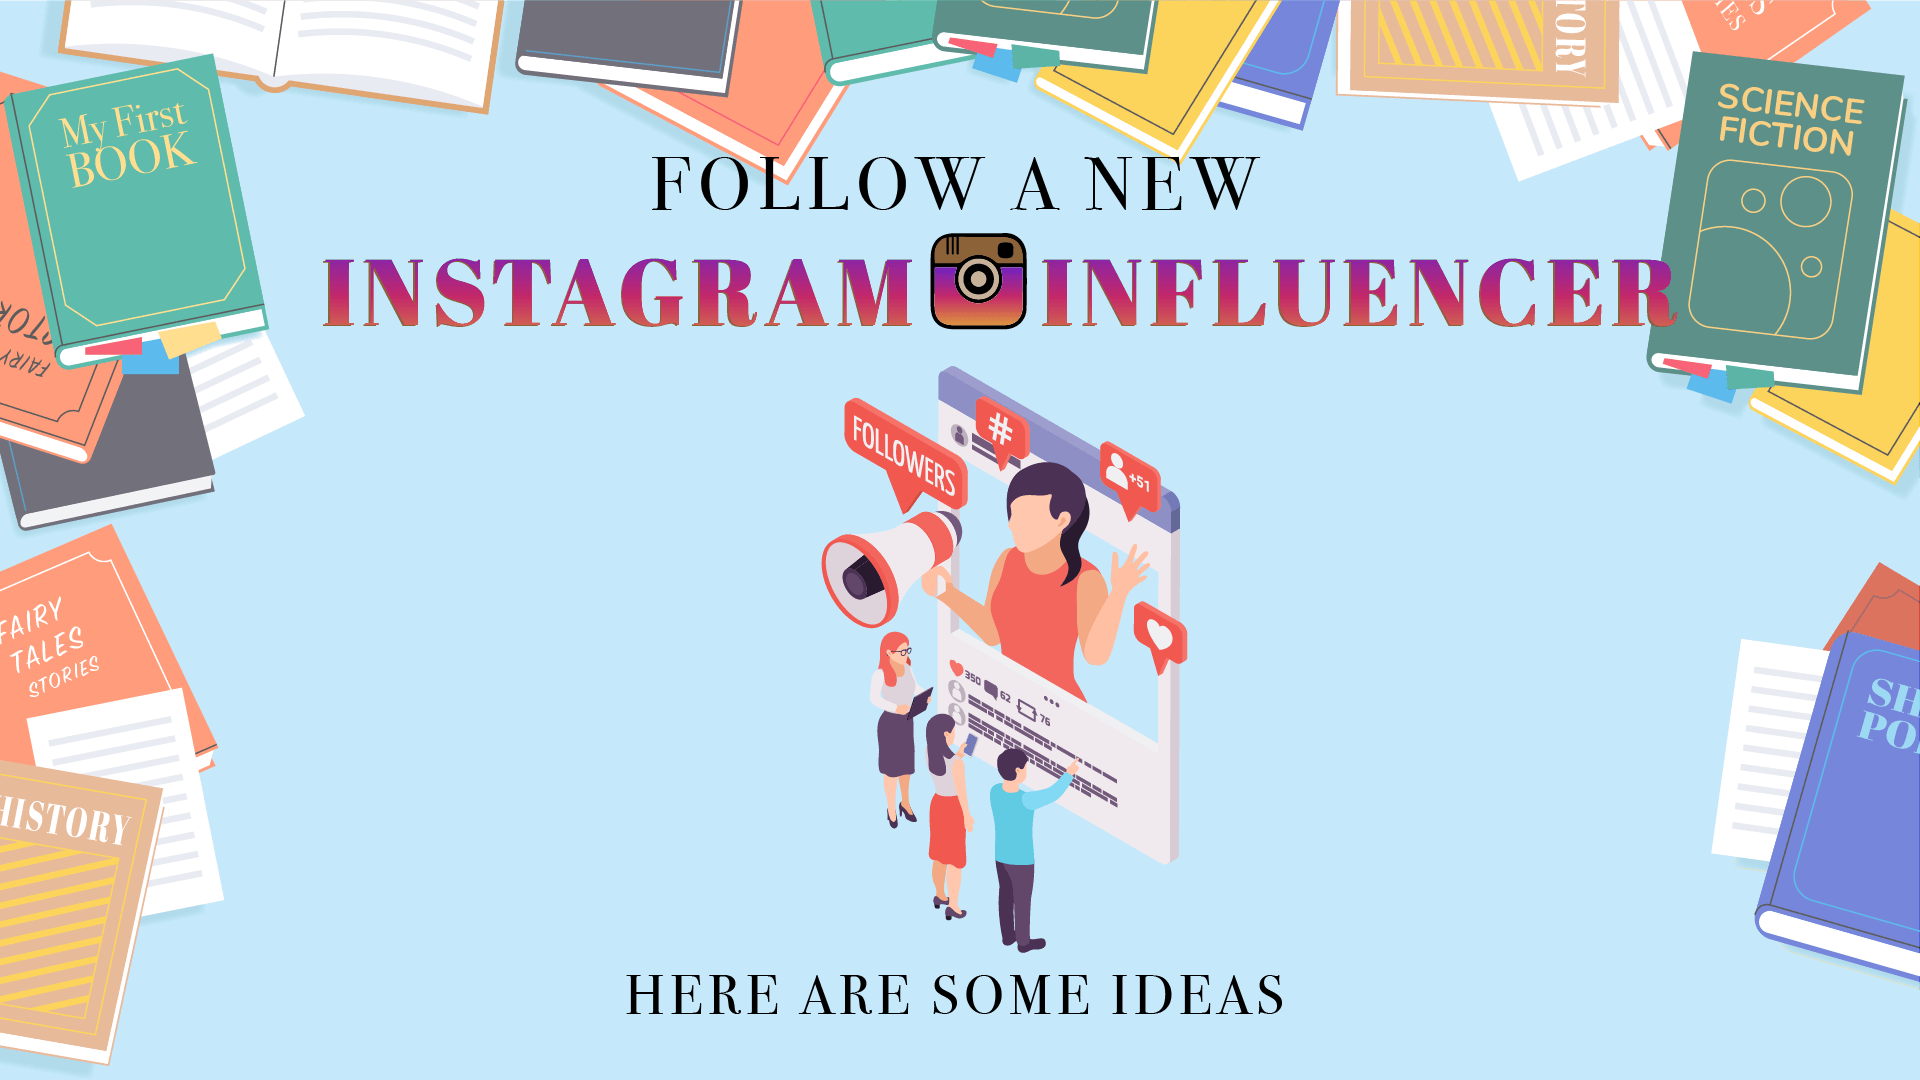 Books border, headline- first line: Follow a new second line: Instagram Influencer third line: Here are some ideas Graphics instagram design layout with three person stand front and clicked or look at a phone/tablet.